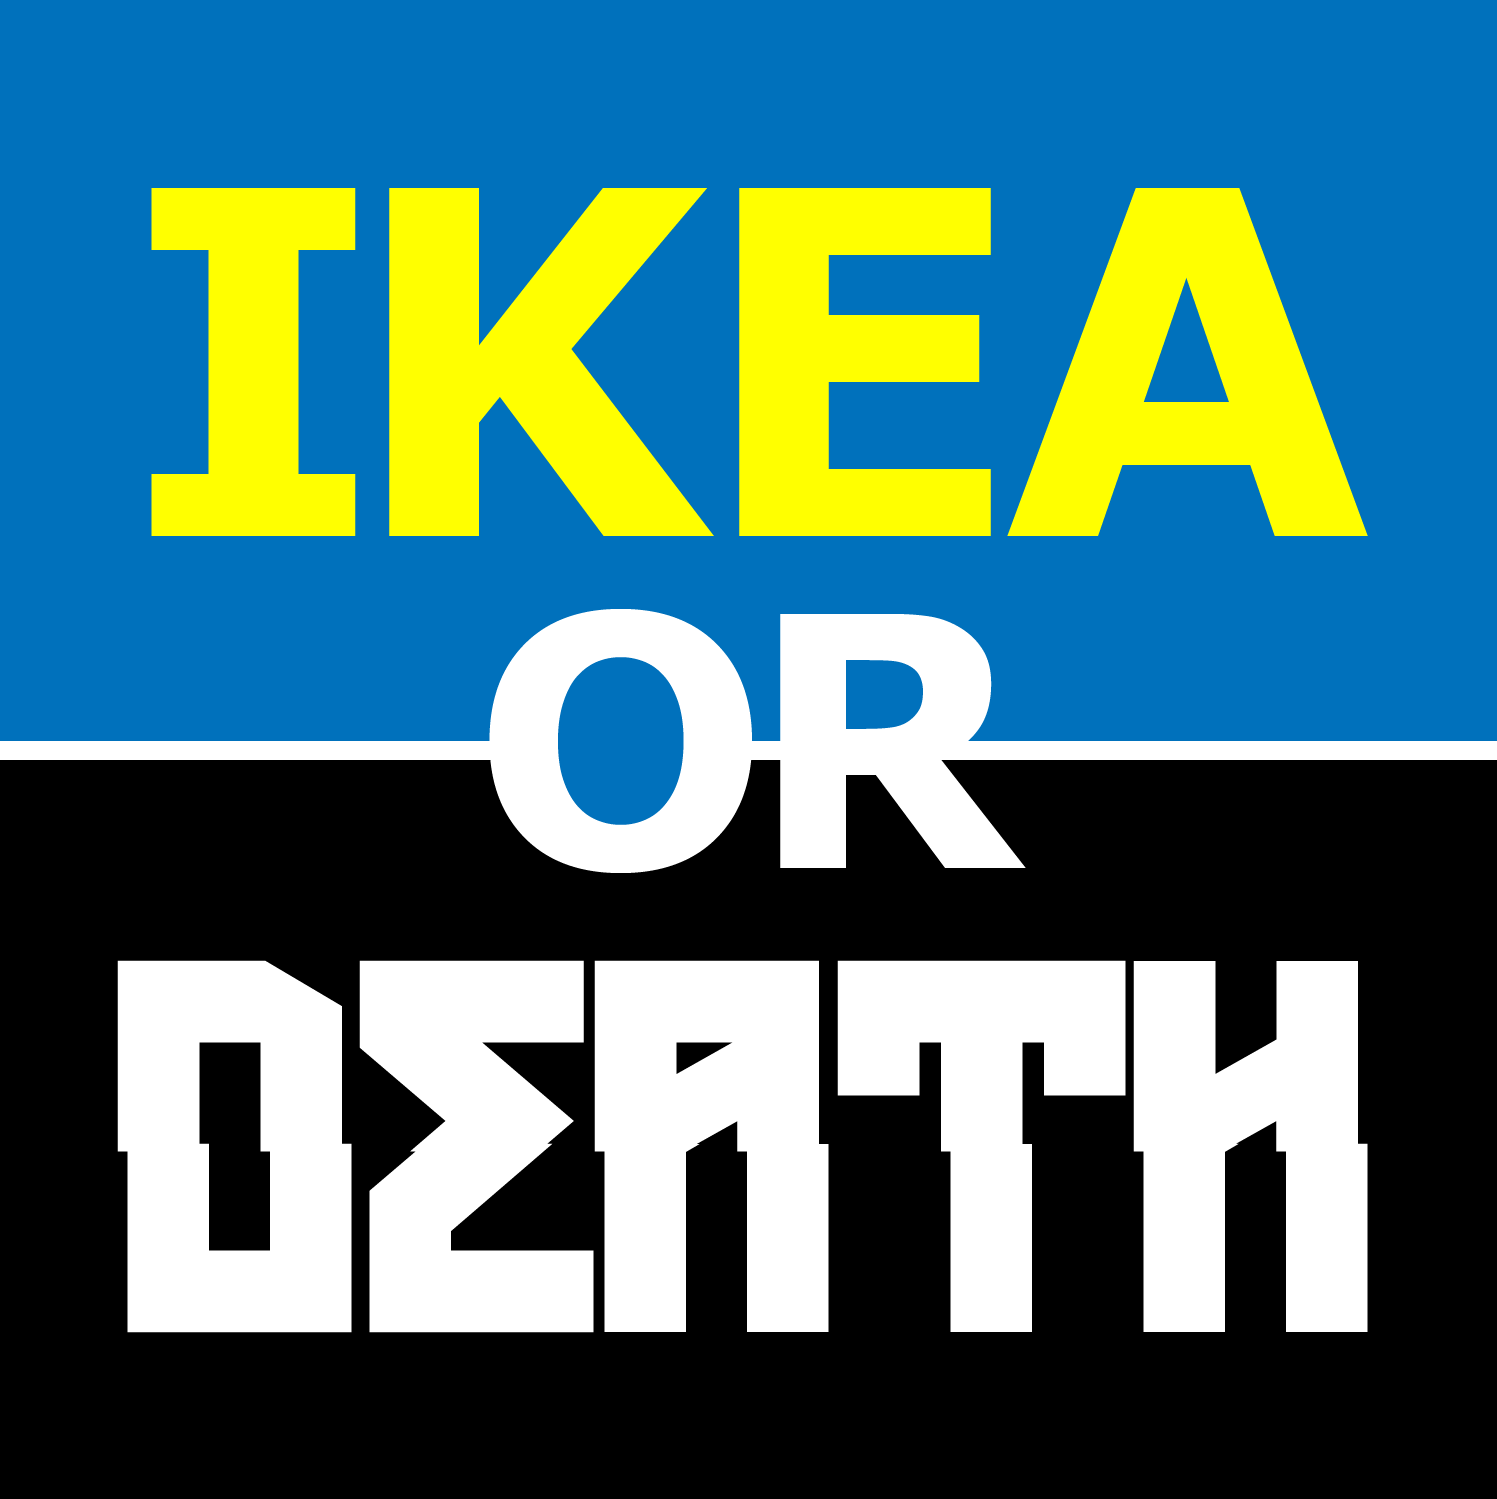 Is it a metal band or ikea furniture? (game link in comments)